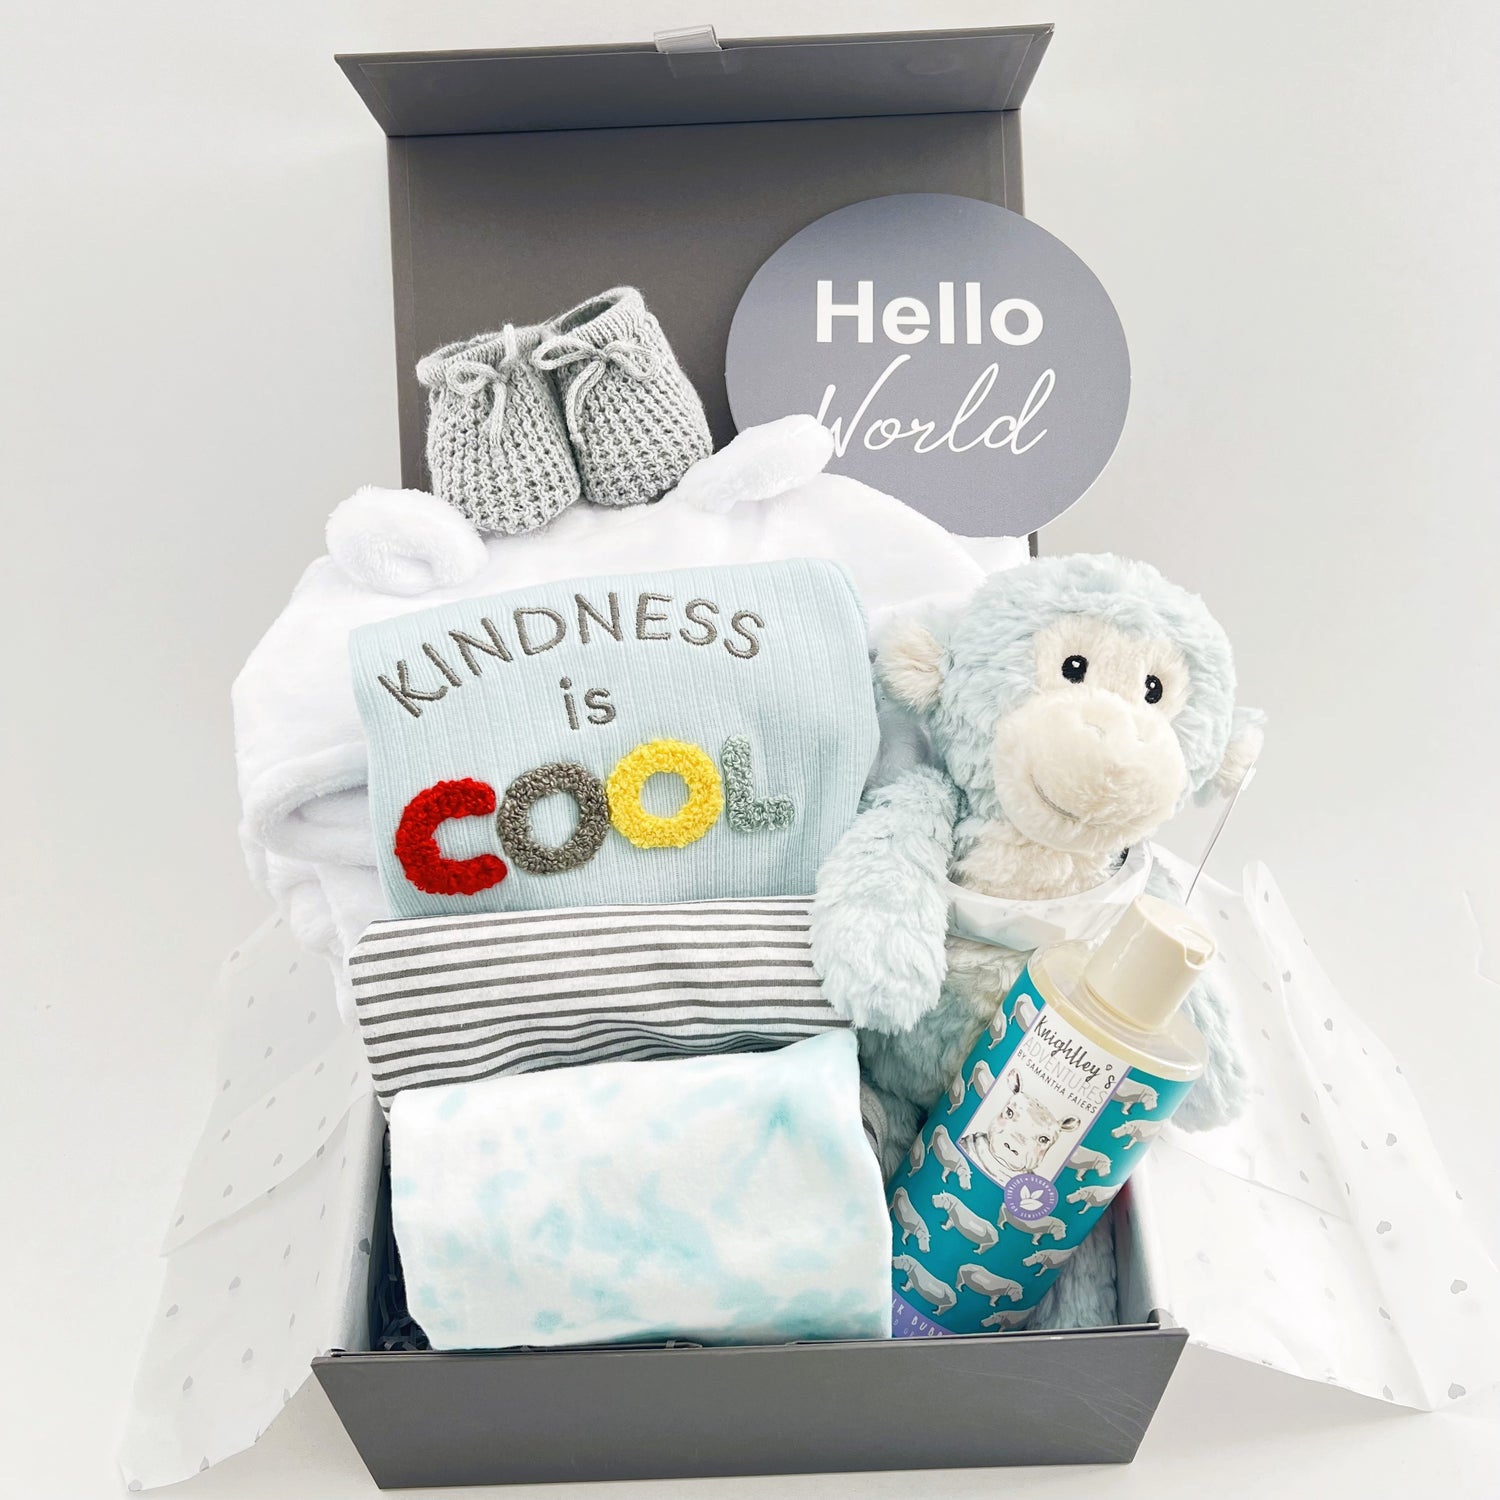 New baby boy hamper gift box containing a blue monkey soft baby toy, A set of three organic botton baby body suits, one with the wording " kindness is cool", a white baby hooded dressing gown,  Knightley's Adventure bath wash, a pair of grey baby booties and a baby photography plaque withe the words "Hello world" all in a grey magnetic baby keepsake box.